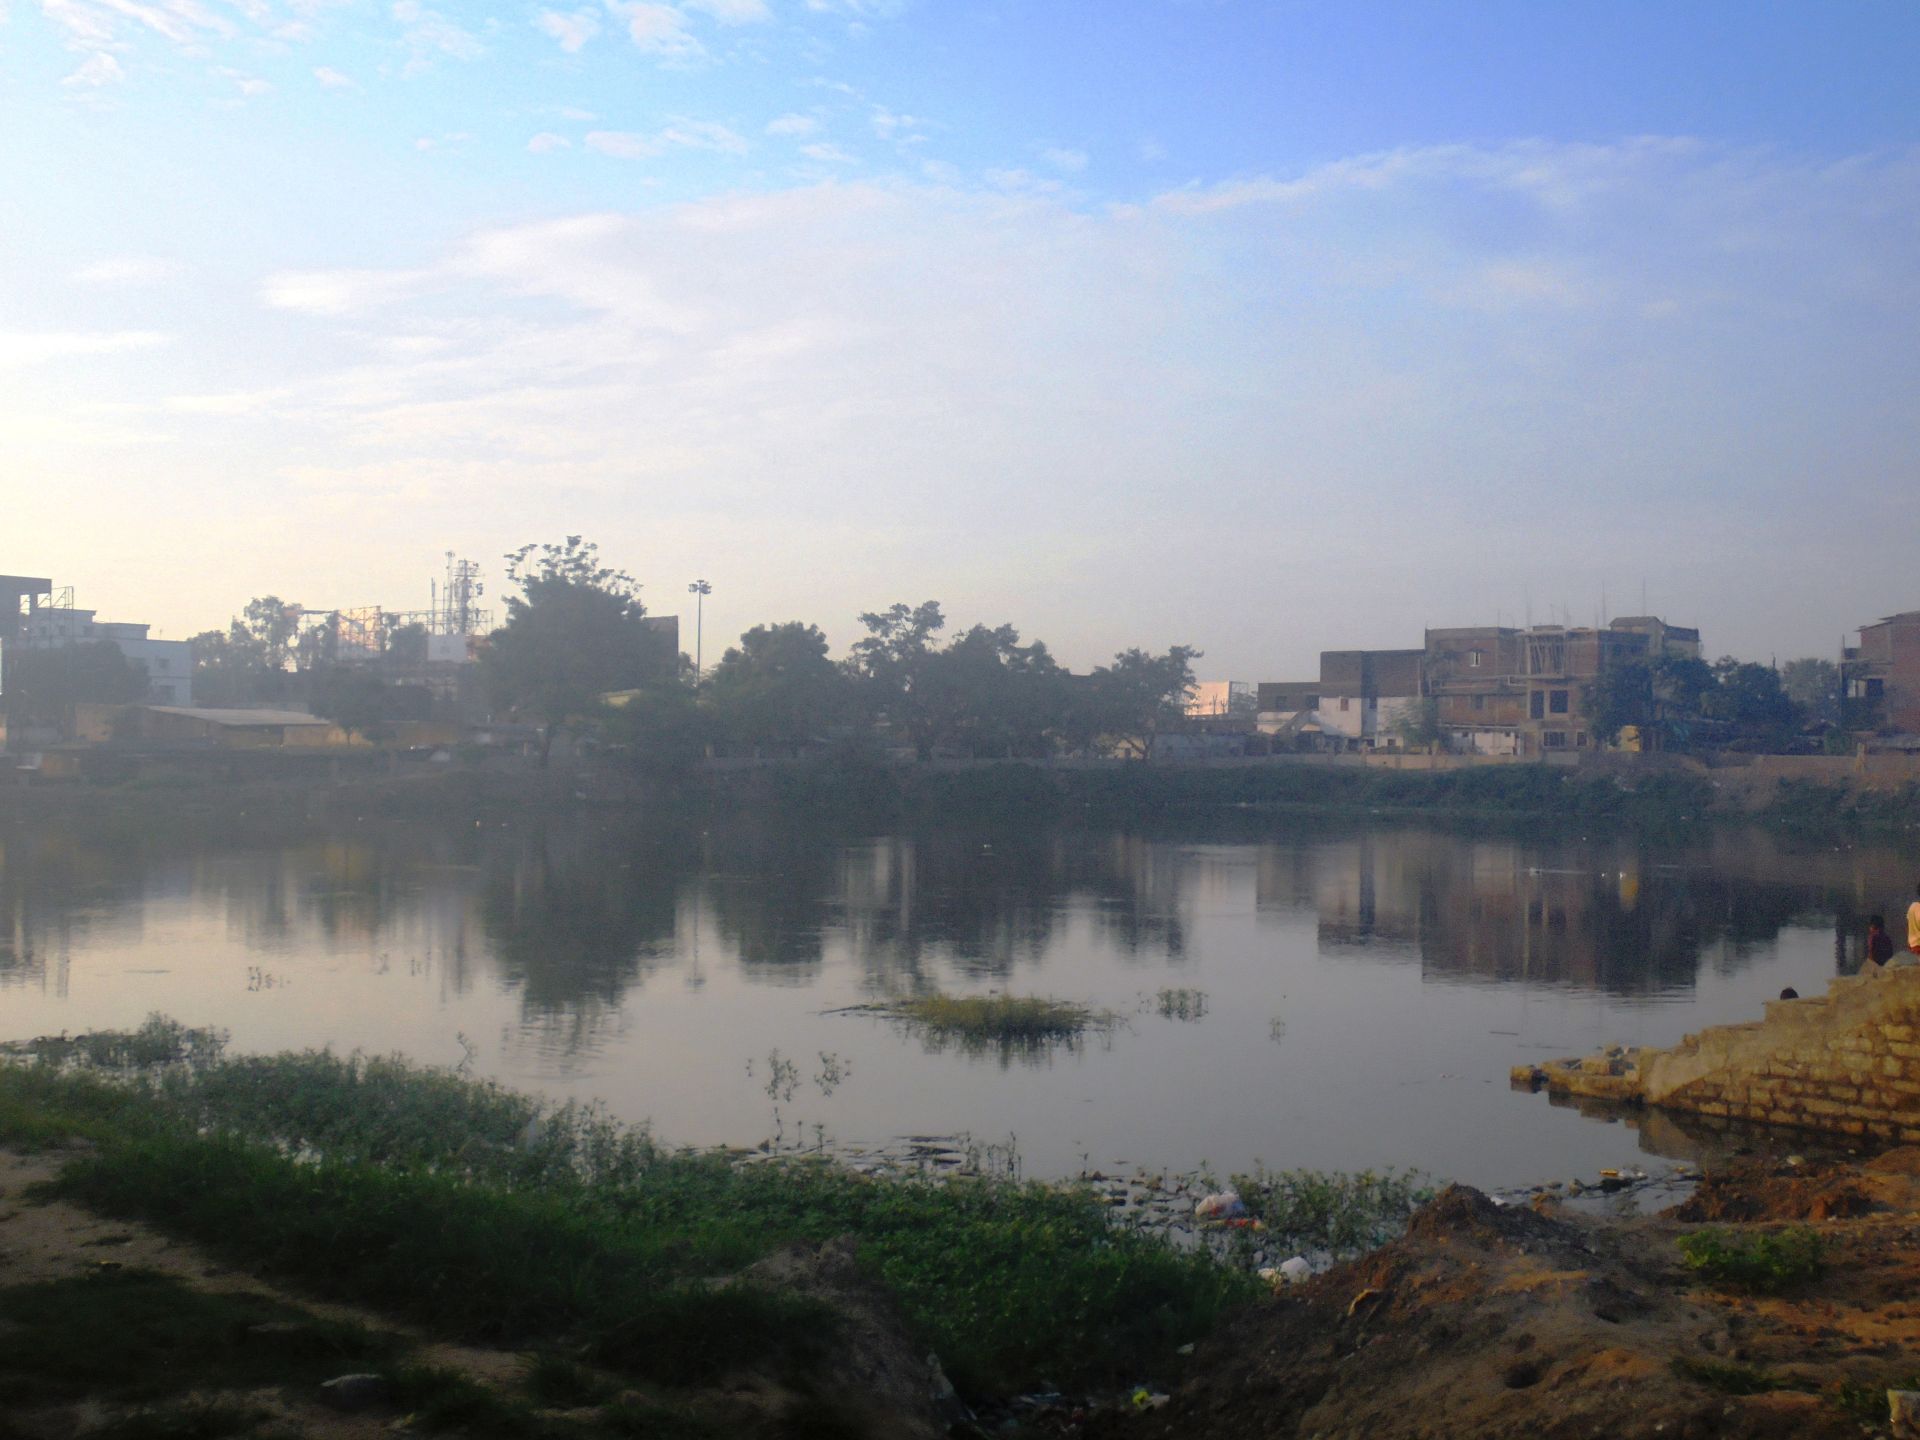 The city’s water bodies like Arghoda talab are dirty, clogged with plastic, garbage and sewage.